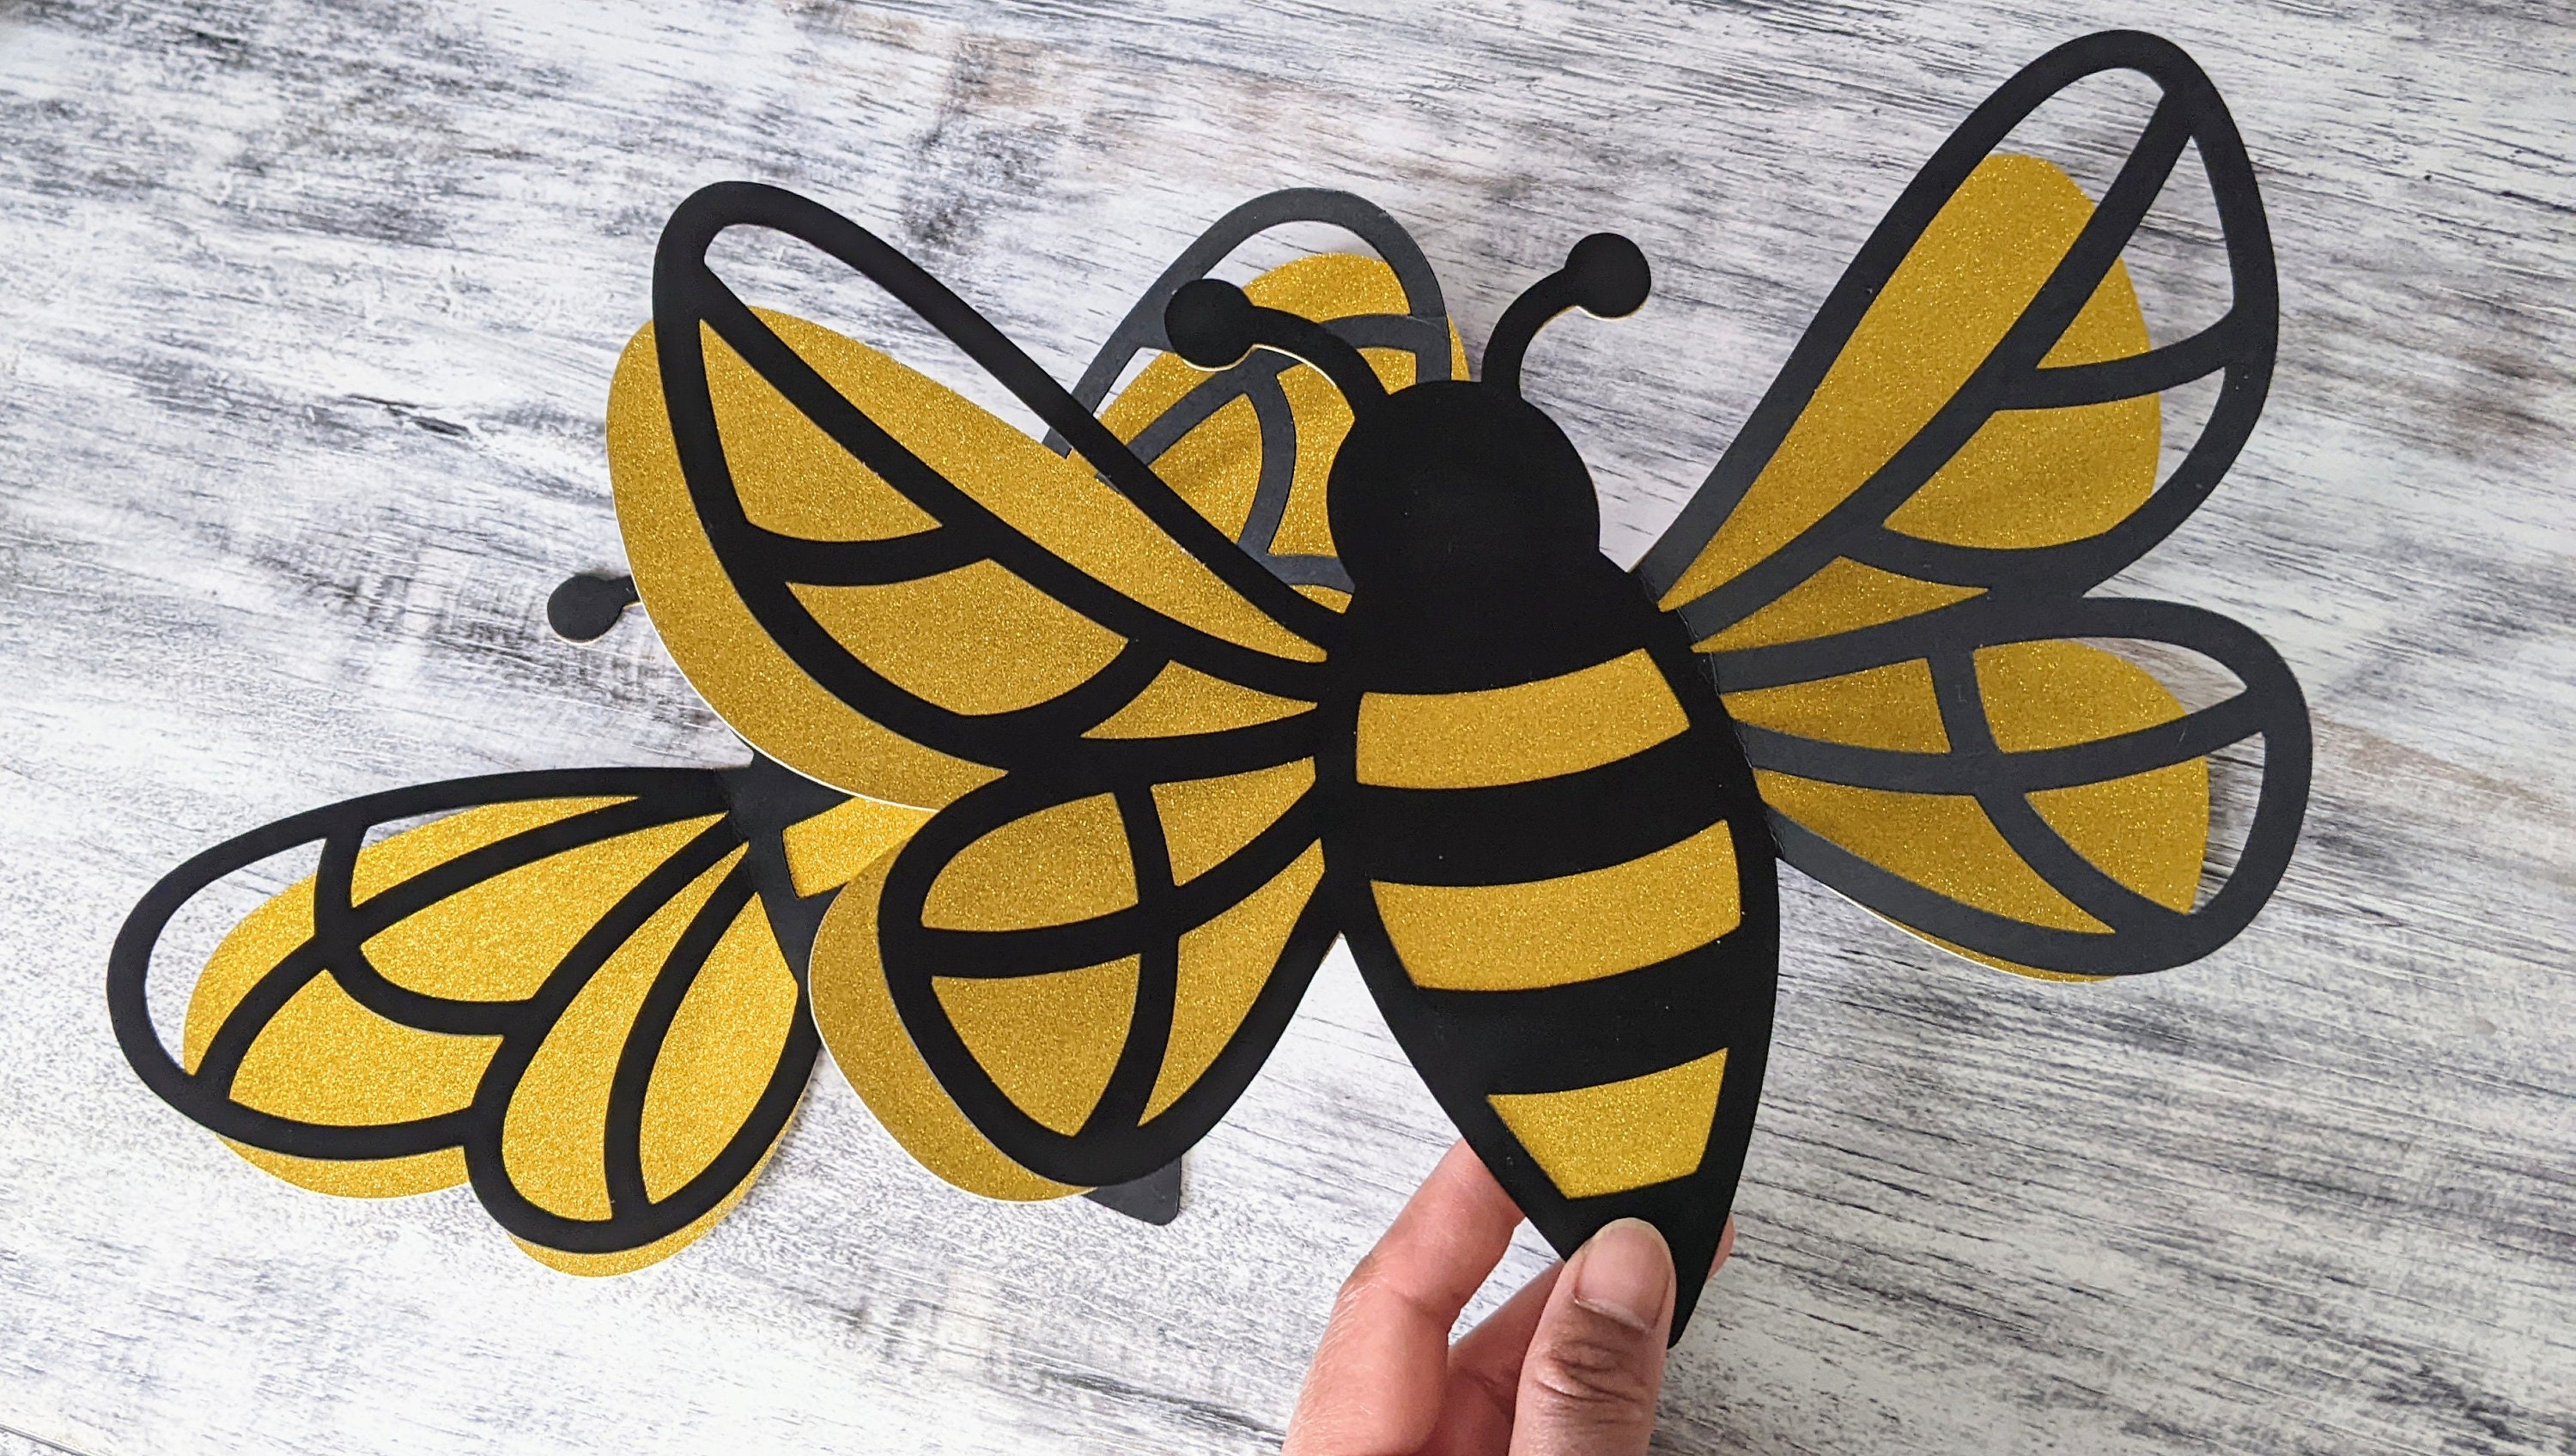 Bumble Bee Shape Unfinished Wood Cutouts Variety of Sizes